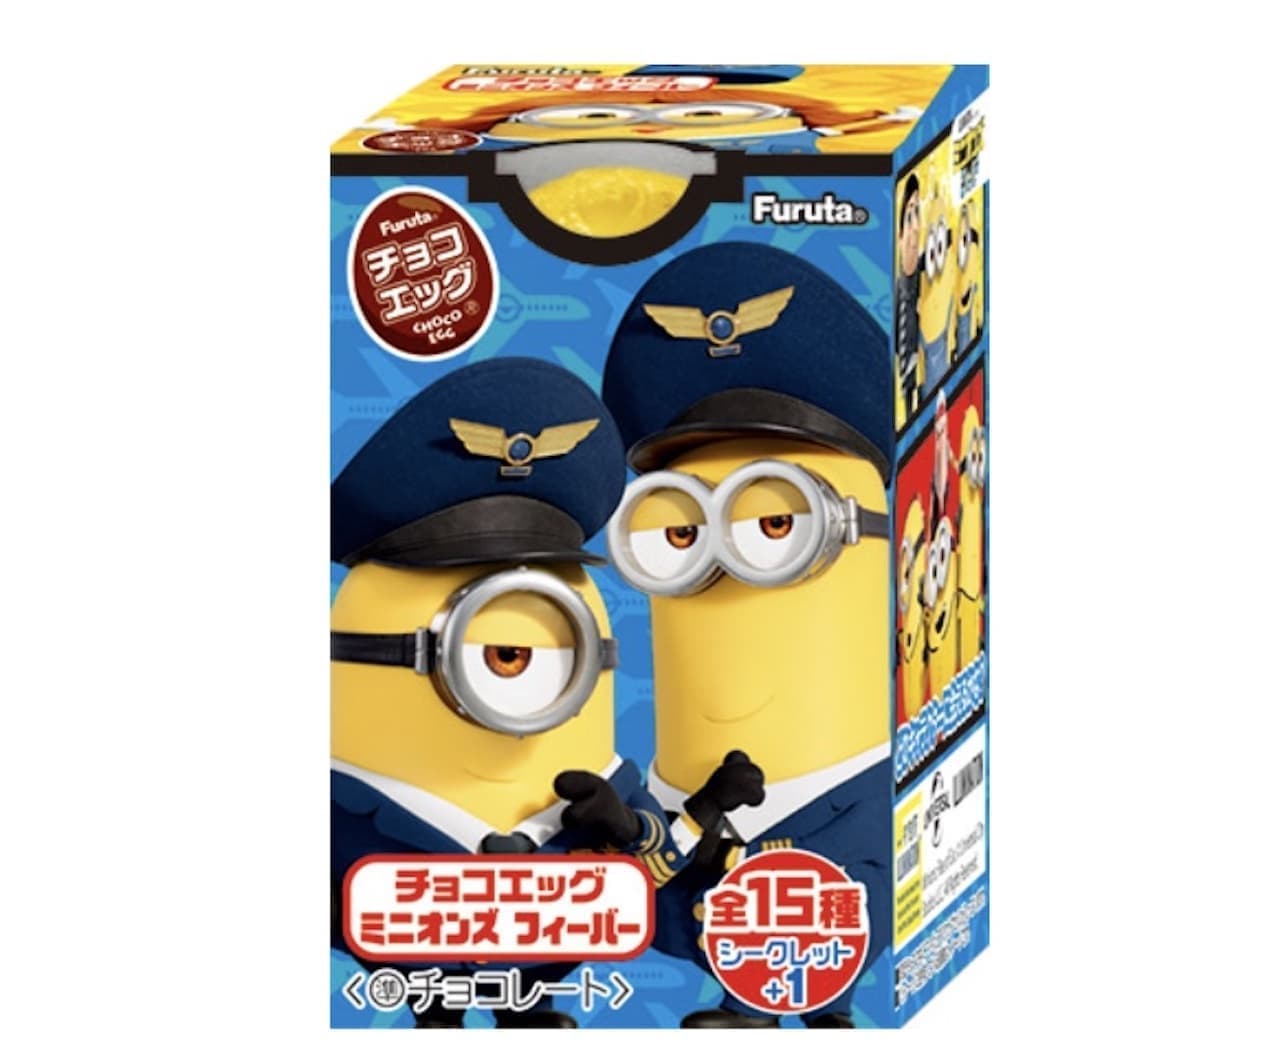 Choco Egg Minions Fever" from Furuta Confectionery